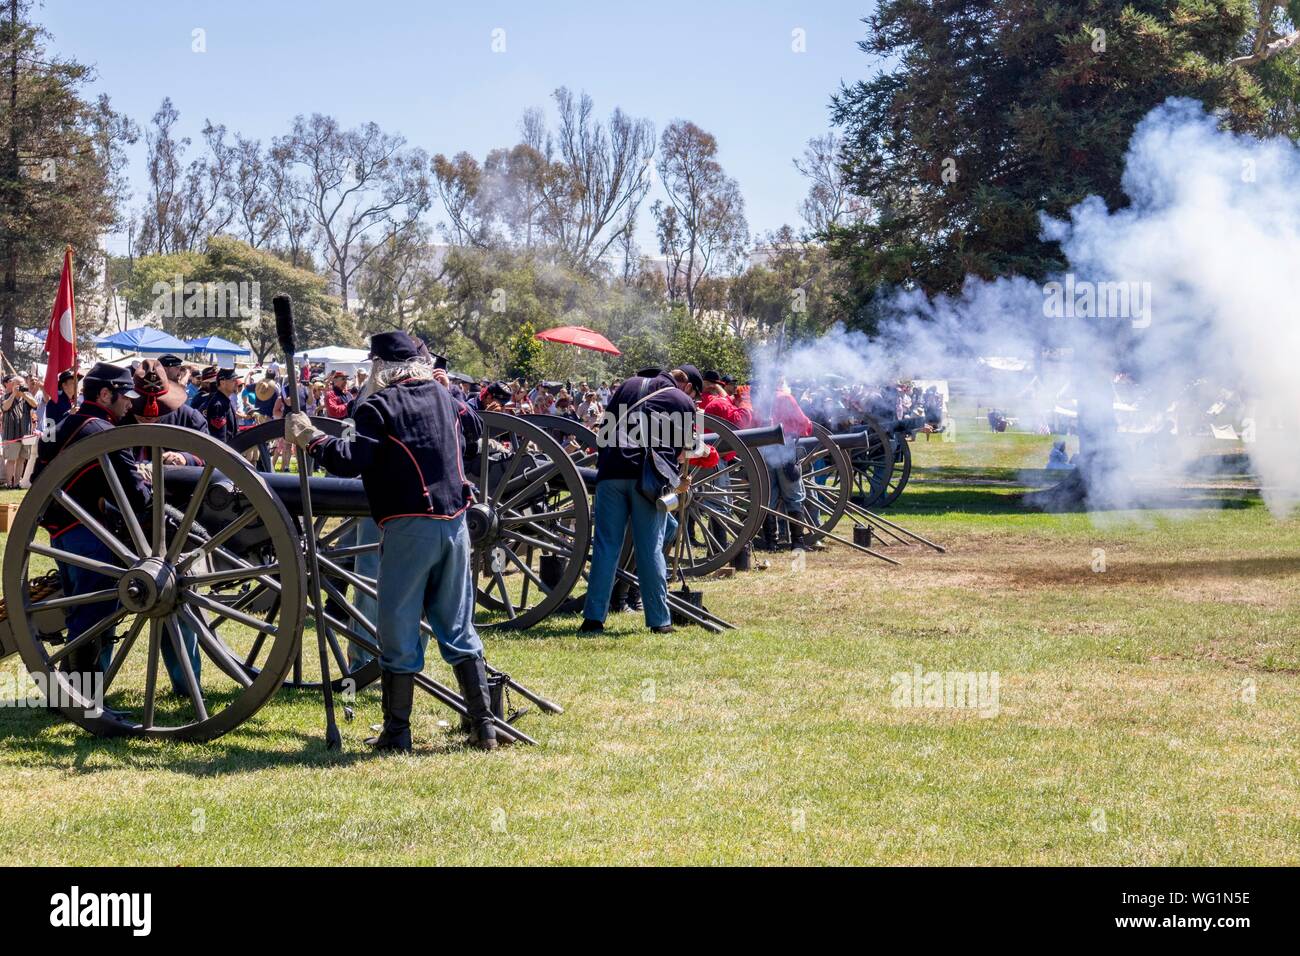 Union soldiers firing cannons during a Civil War reenactment Stock Photo